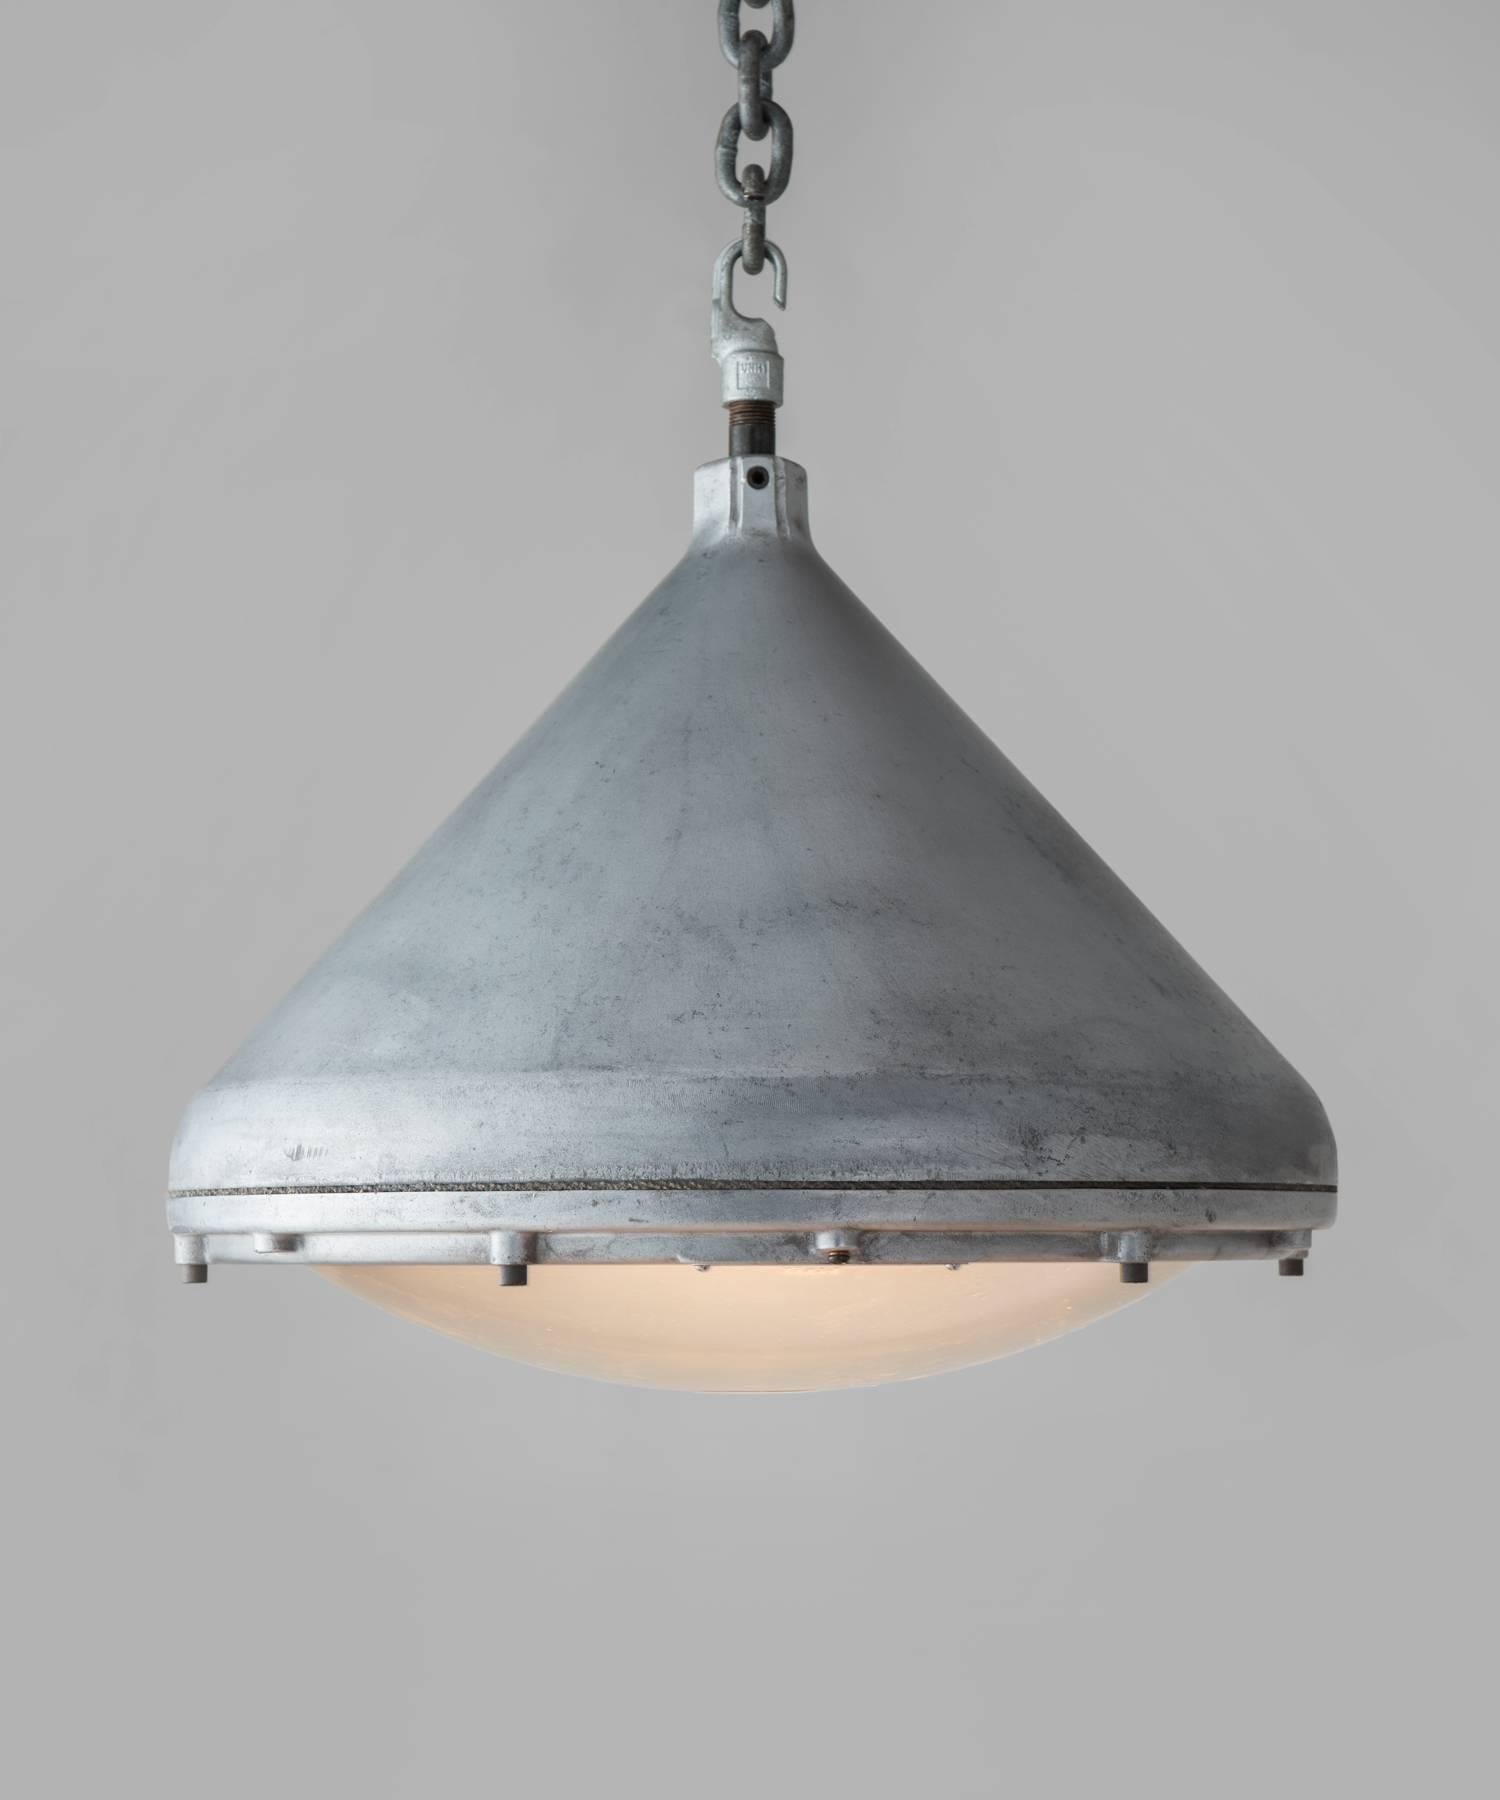 Crouse-Hinds Aluminium Pendant, America, circa 1950

Generous, industrial form with luminous pyrex lens hinged to aluminum fitter. Includes manufacturer's seal.

17.5